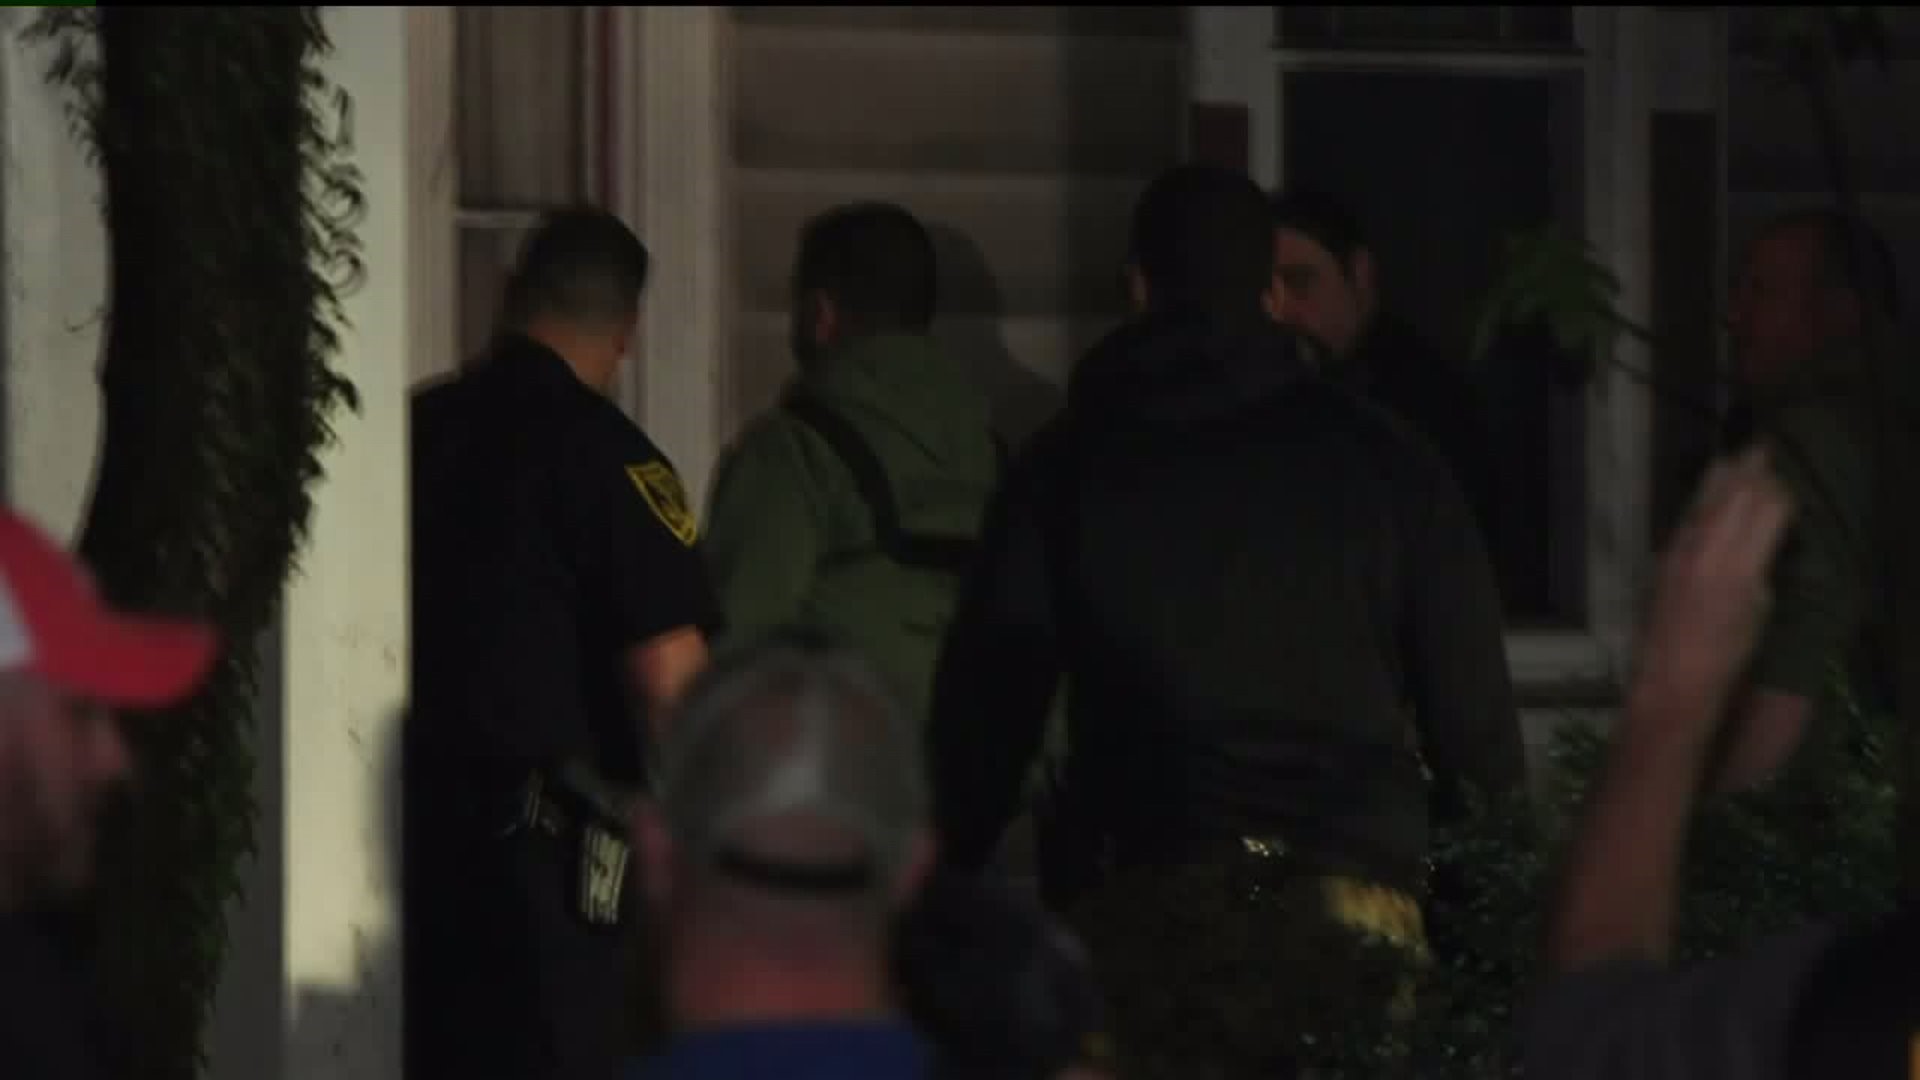 Undercover Officers Raid House in Hazleton, Discover Illegal Nightclub